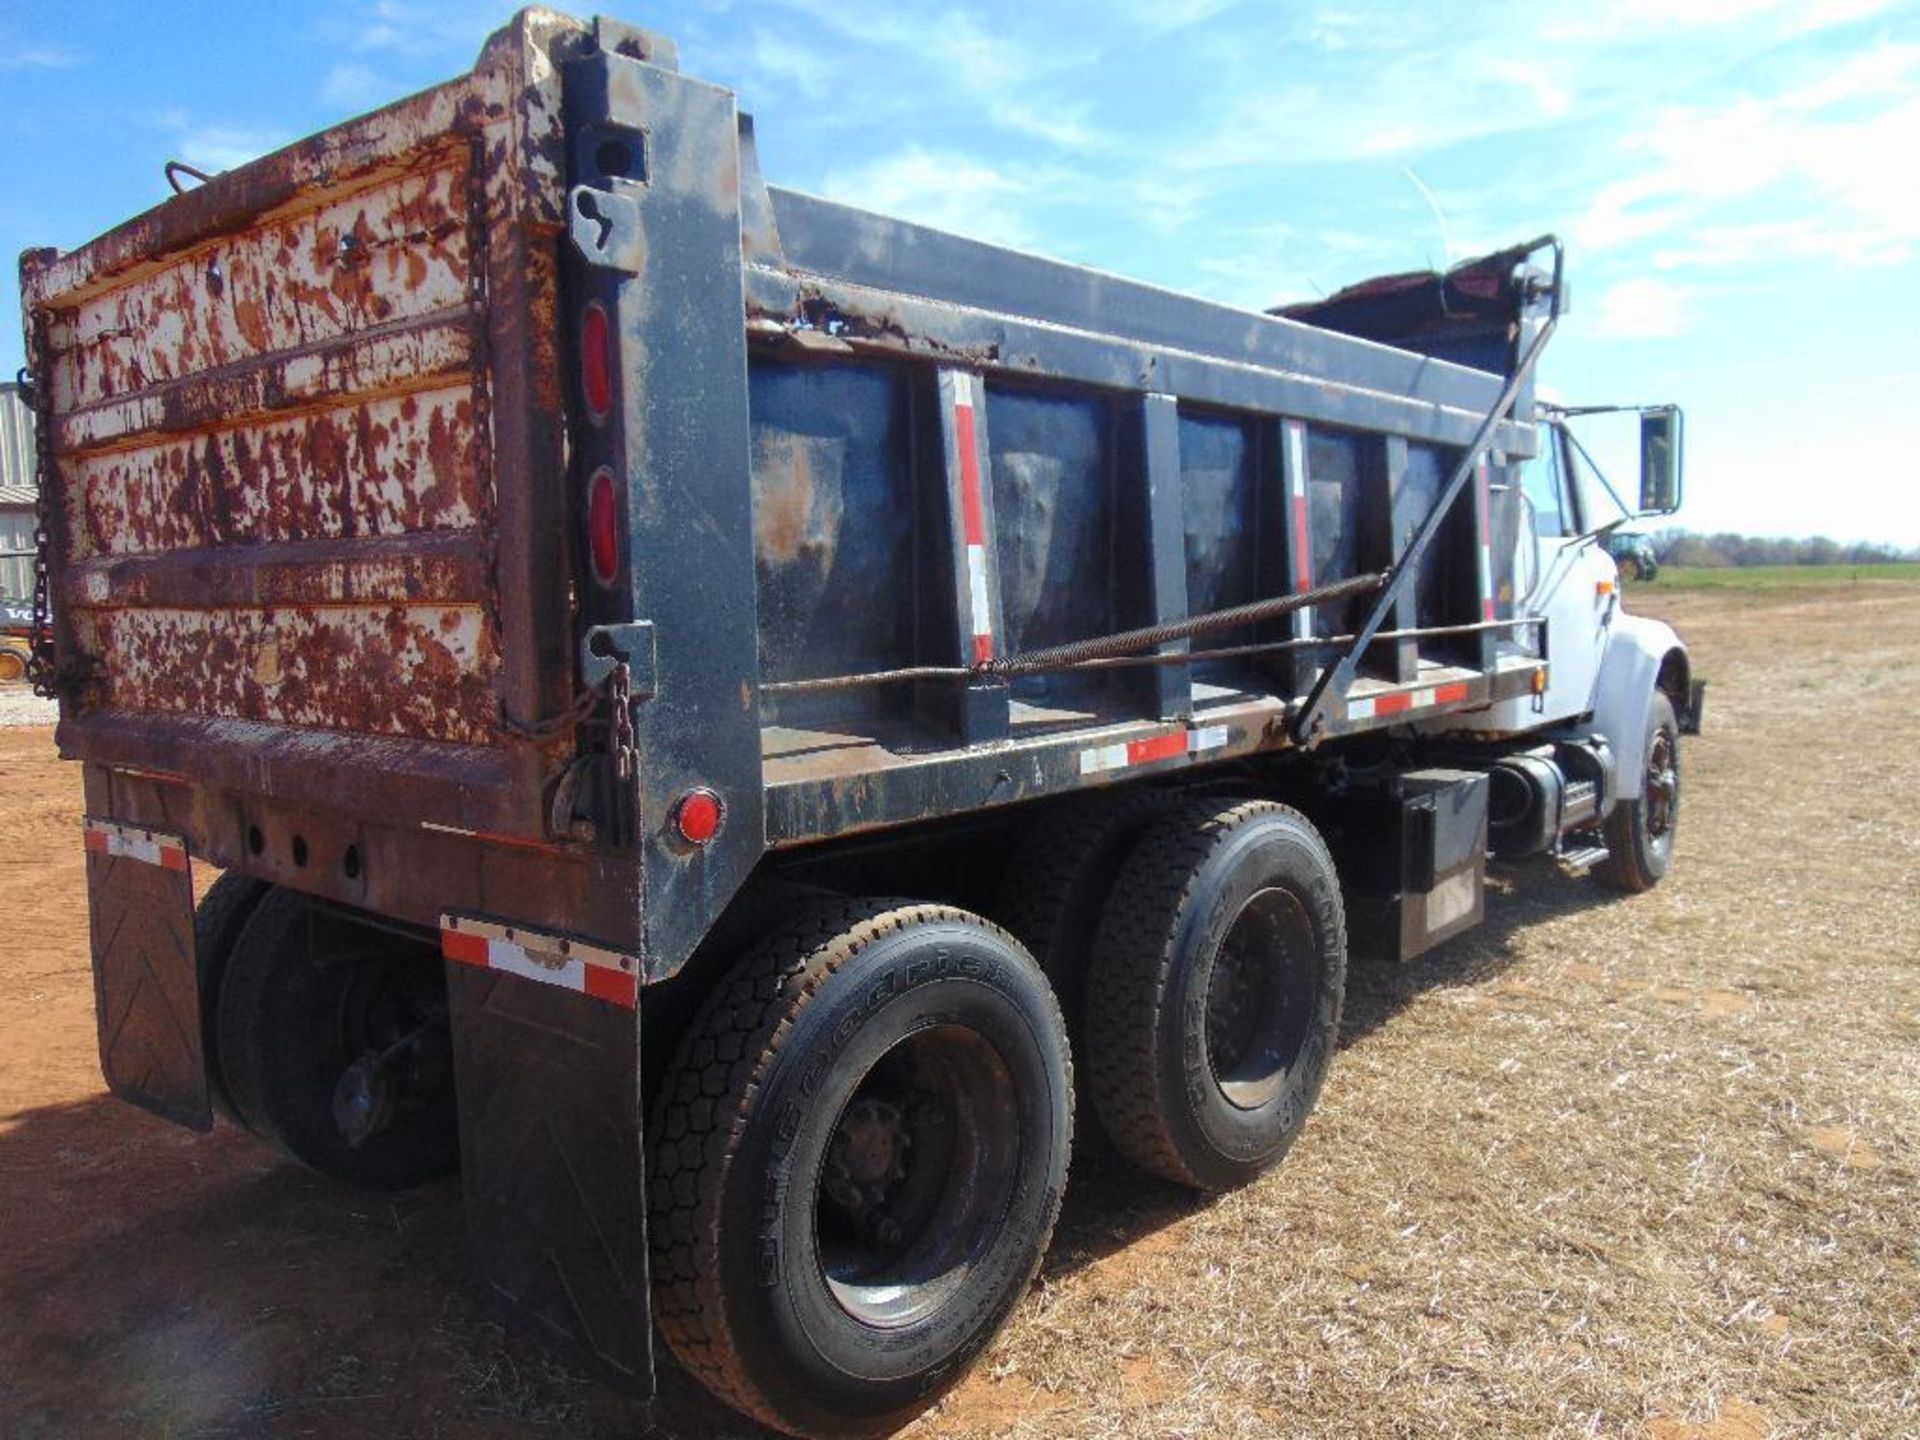 1994 IHC 4900 T/A Dump Truck, s/n 1htshaar65h633467, dt466 eng, auto trans, od reads 64825 miles, 14 - Image 7 of 10